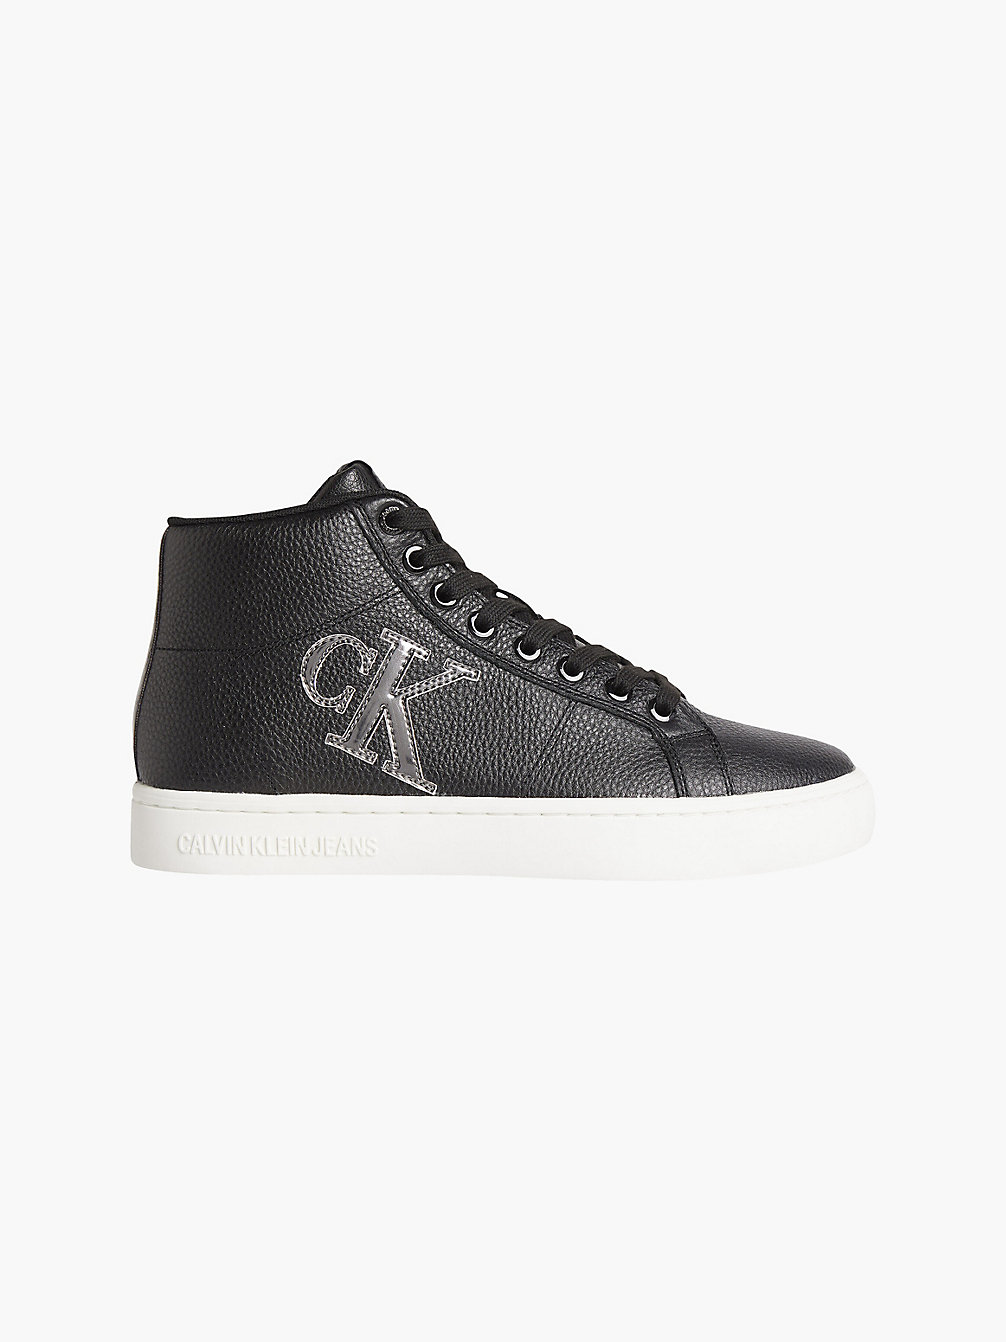 BLACK SILVER Leather High-Top Trainers undefined women Calvin Klein